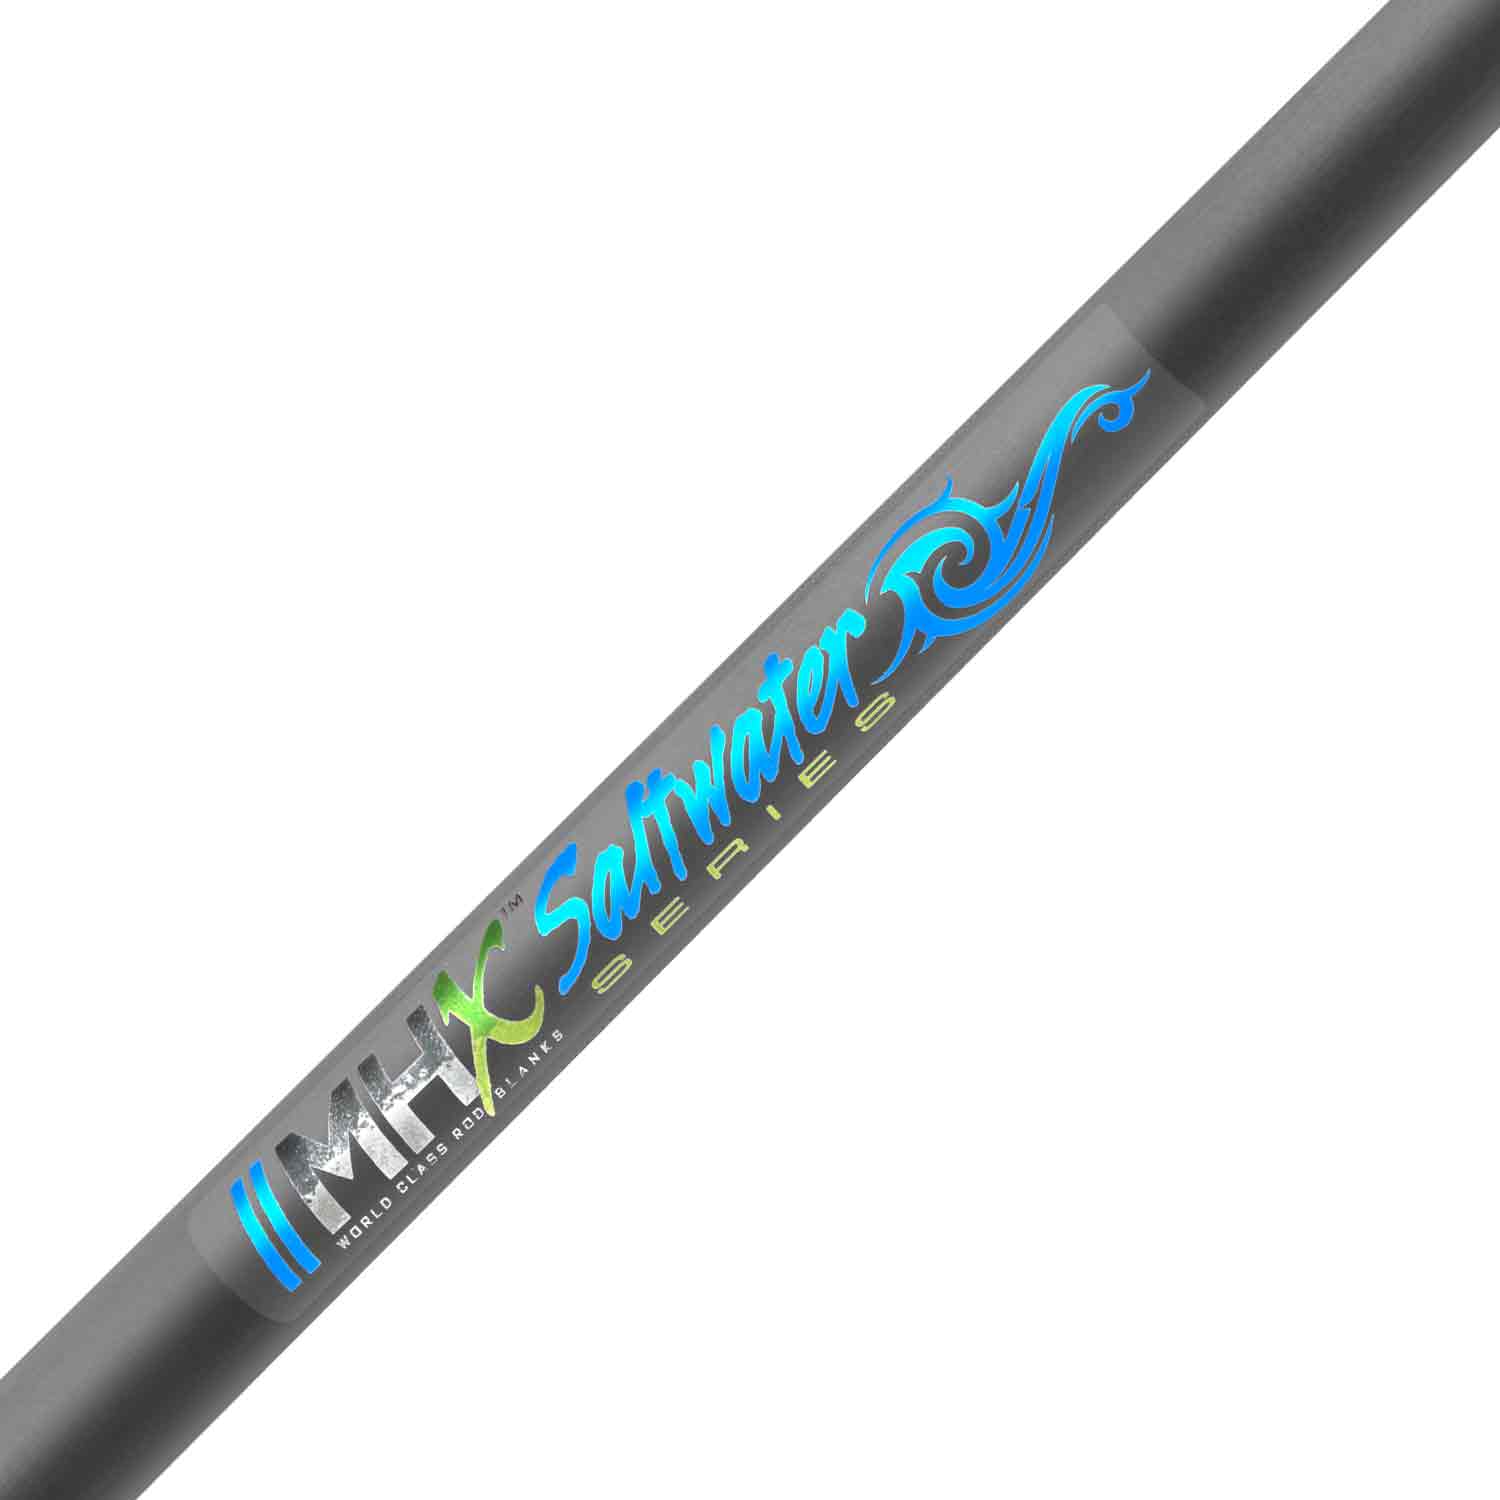 MHX 7'0" Med-Heavy Composite Saltwater Rod Blank - GFC84MH